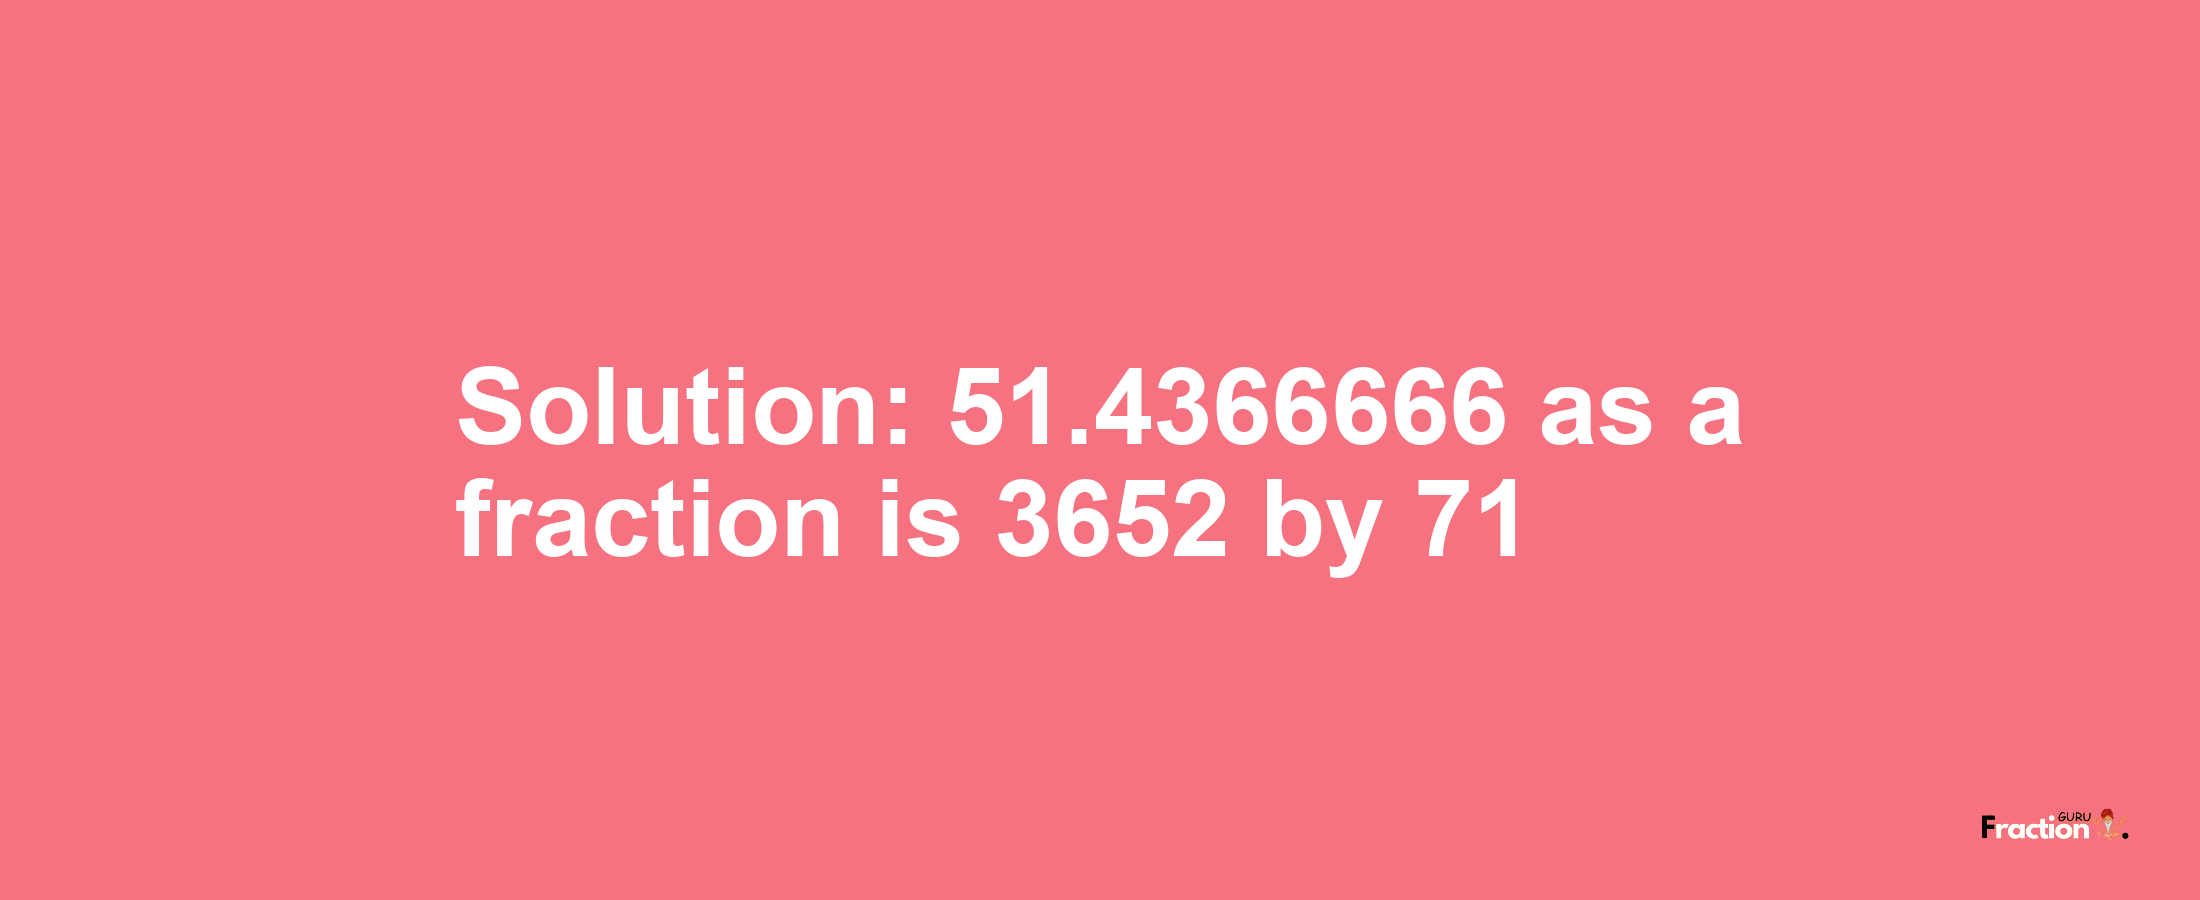 Solution:51.4366666 as a fraction is 3652/71